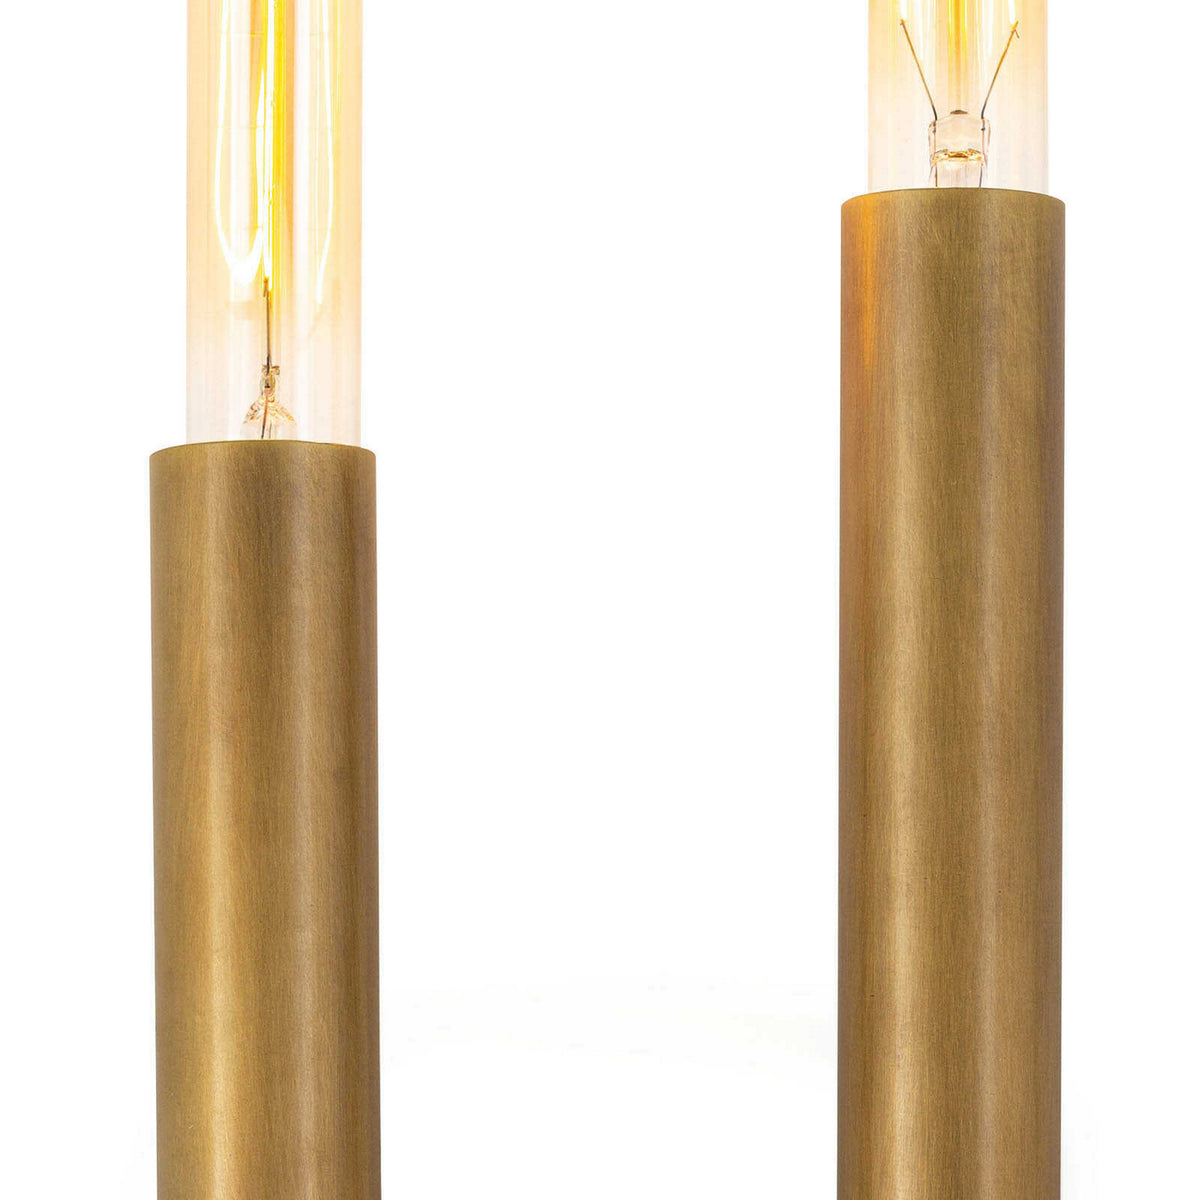 Regina Andrew - 15-1146NB - Two Light Wall Sconce - Wolfe - Natural Brass